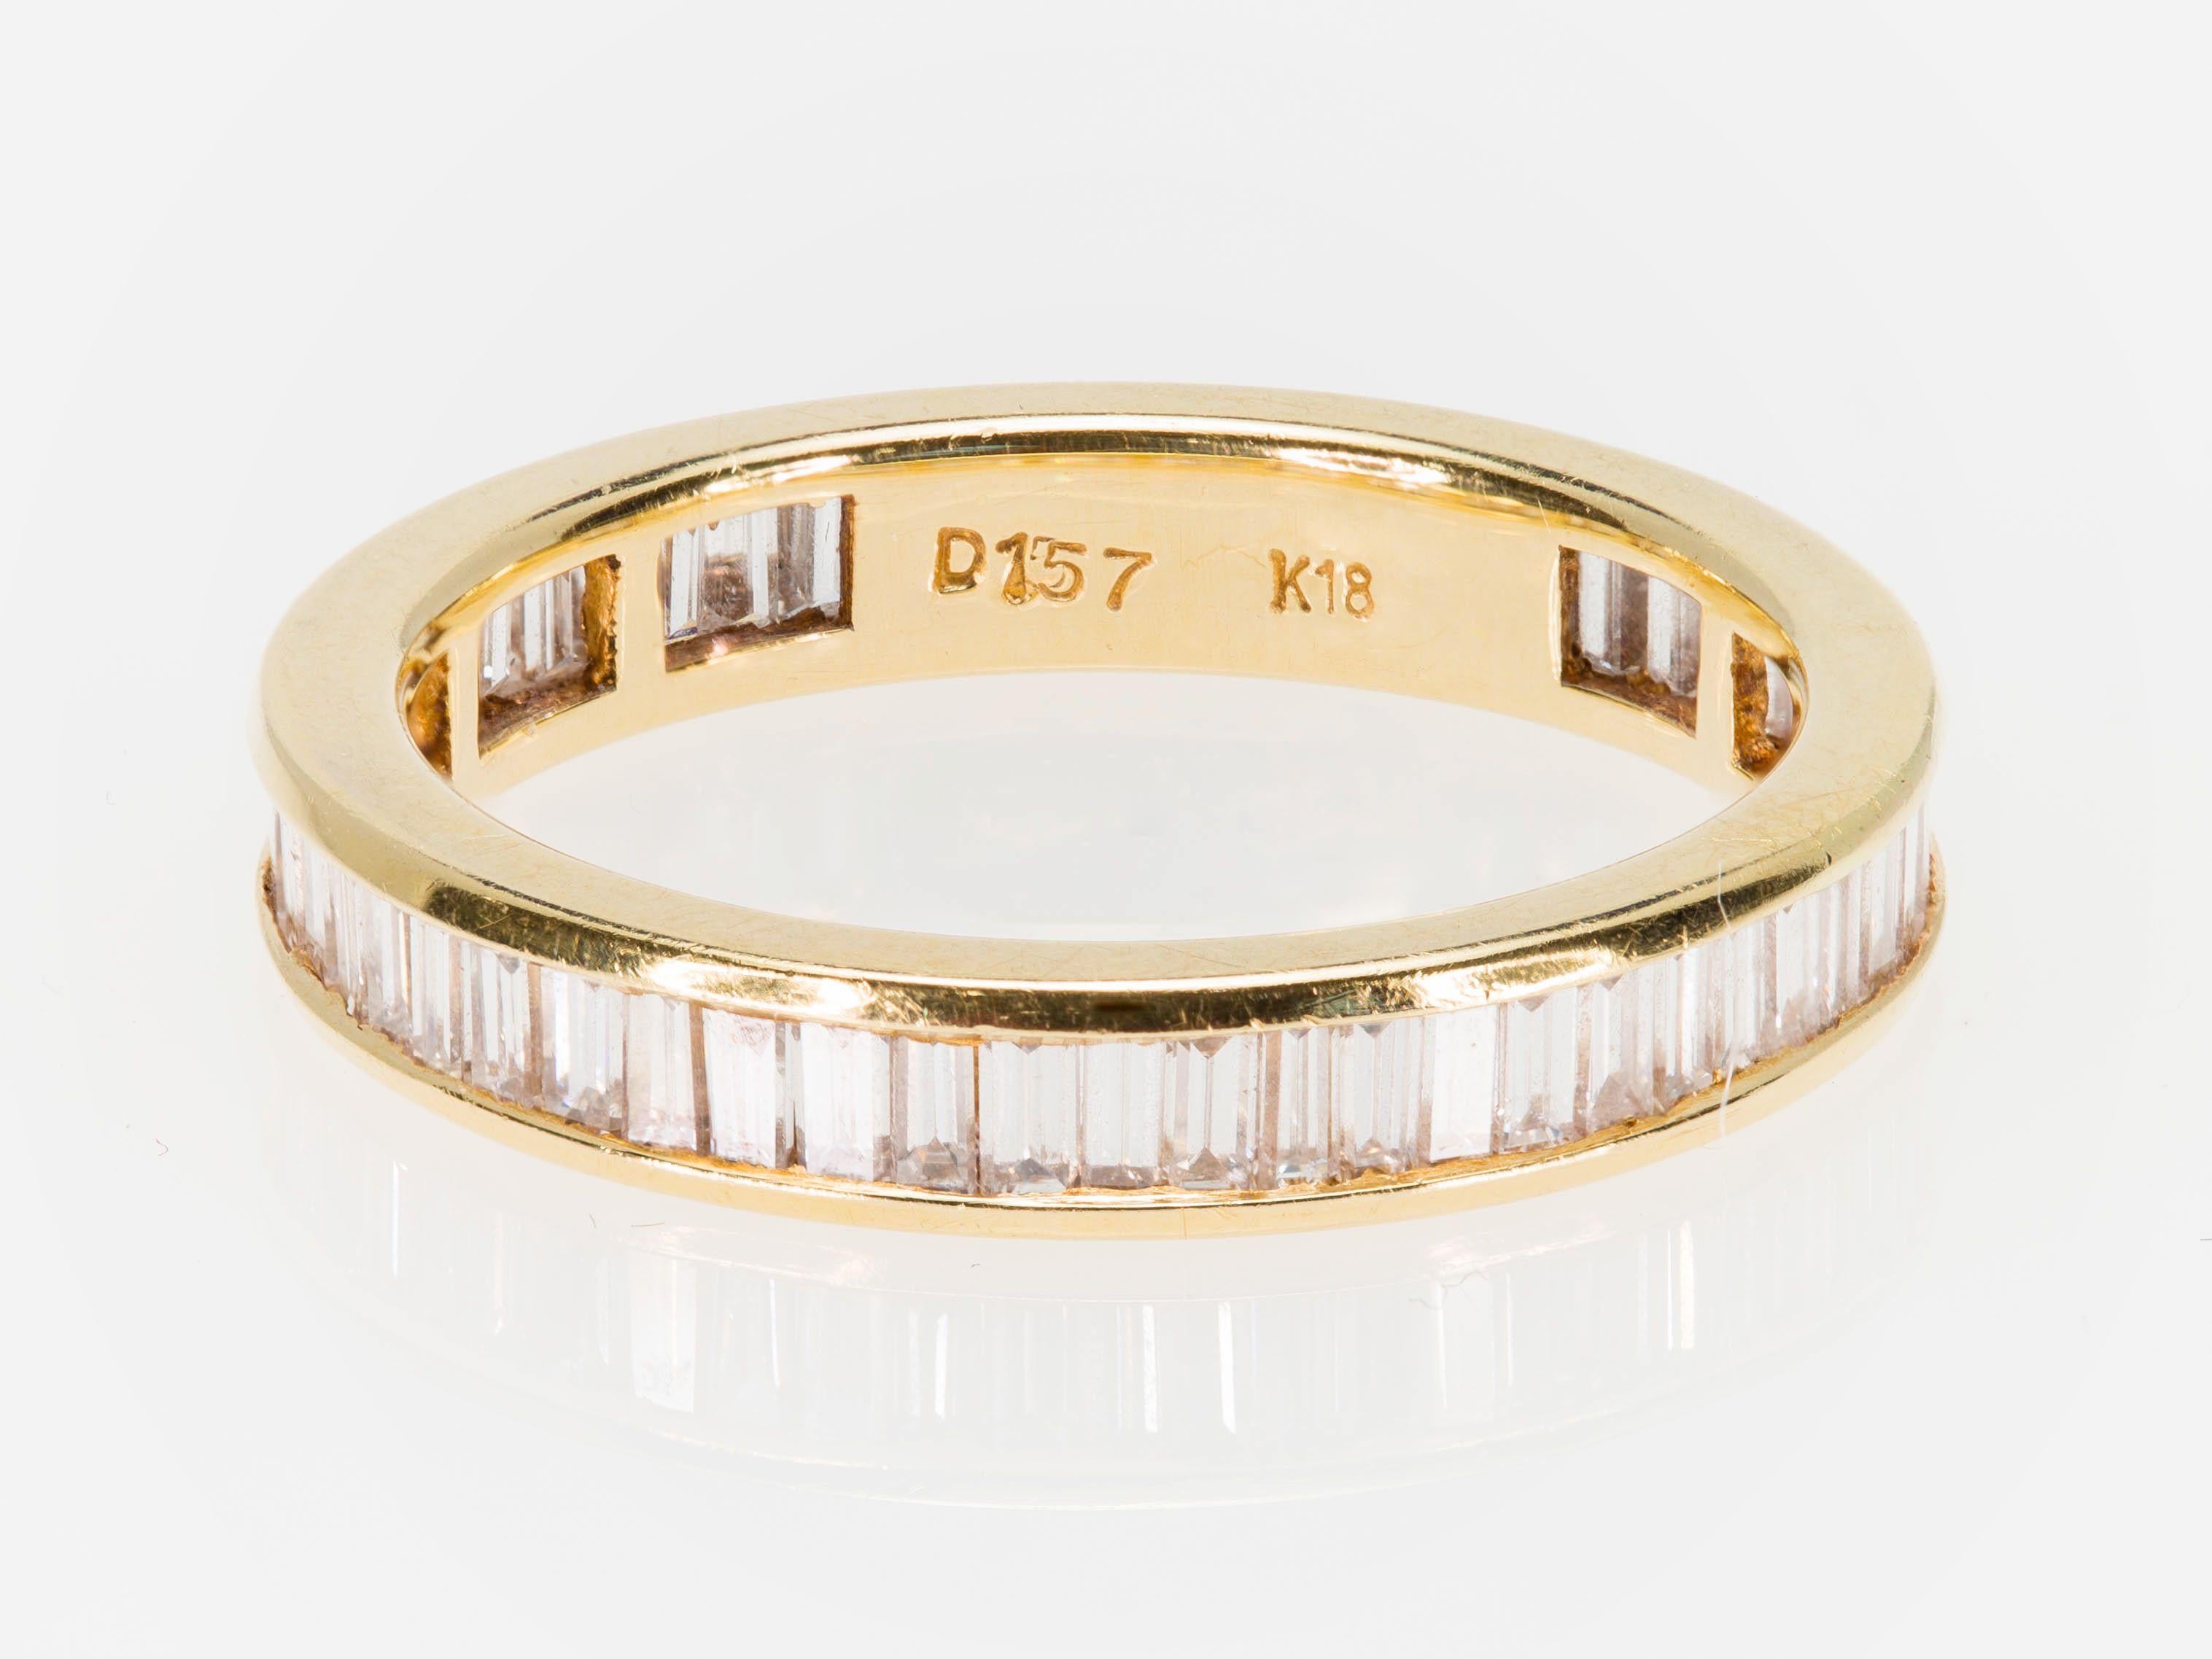 An American Eternity baguette cut Diamond band ring circa 1980 in 18K yellow gold, size 6 ¾. This Eternity band wedding ring features baguette-cut Diamonds of an approximate total weight of 1.57 carats. The diamonds grade is IJ color and VS-SI